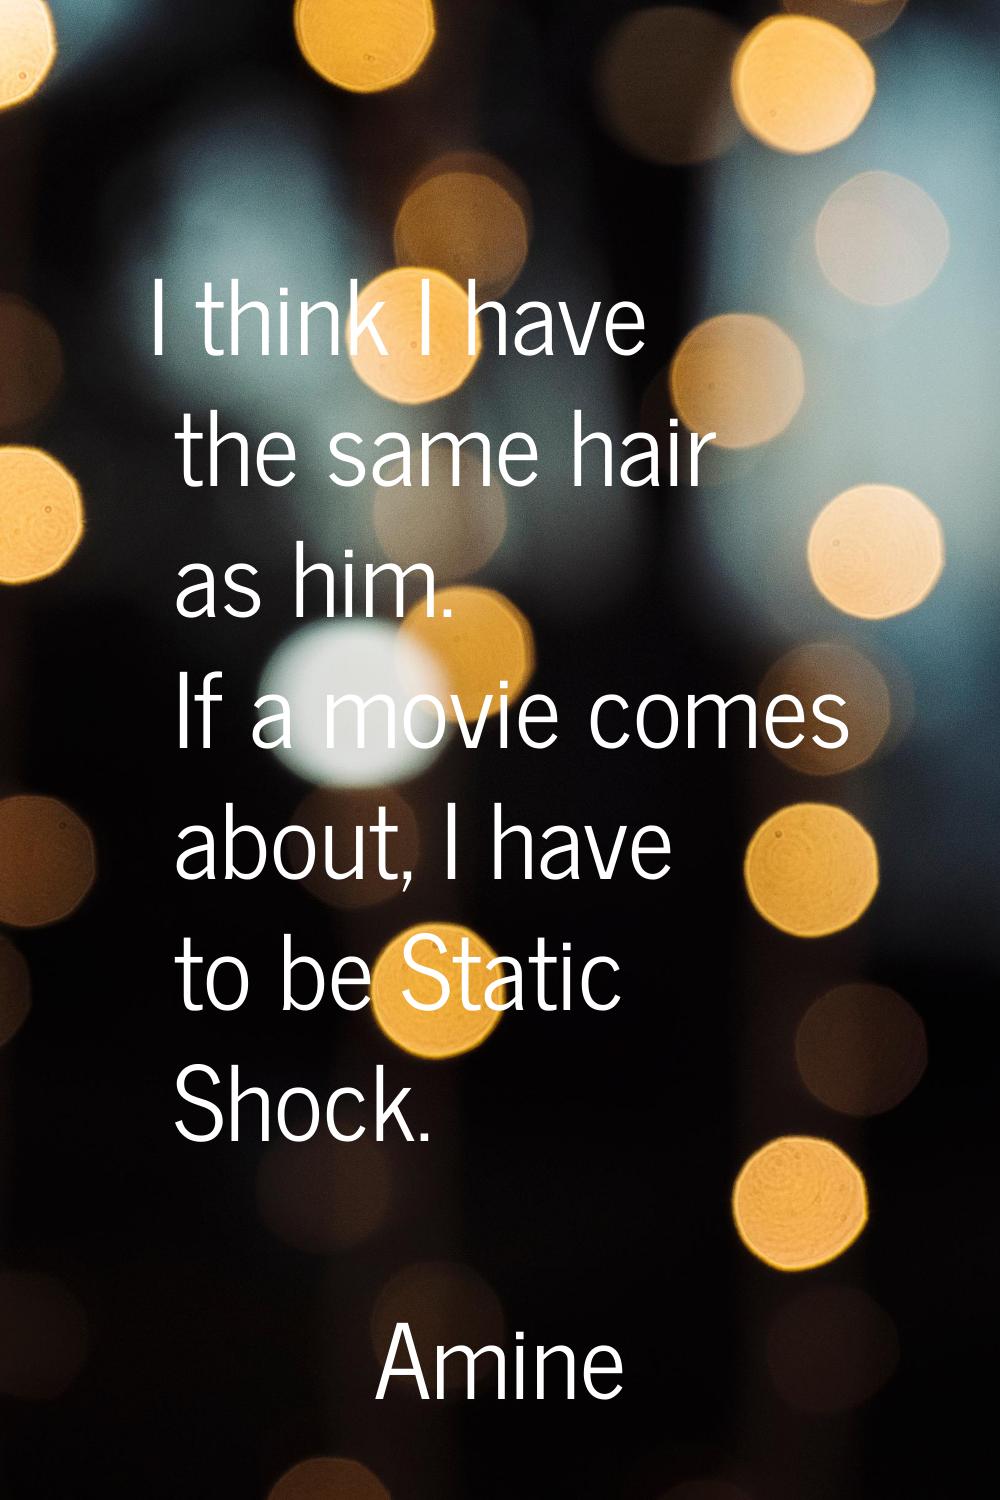 I think I have the same hair as him. If a movie comes about, I have to be Static Shock.